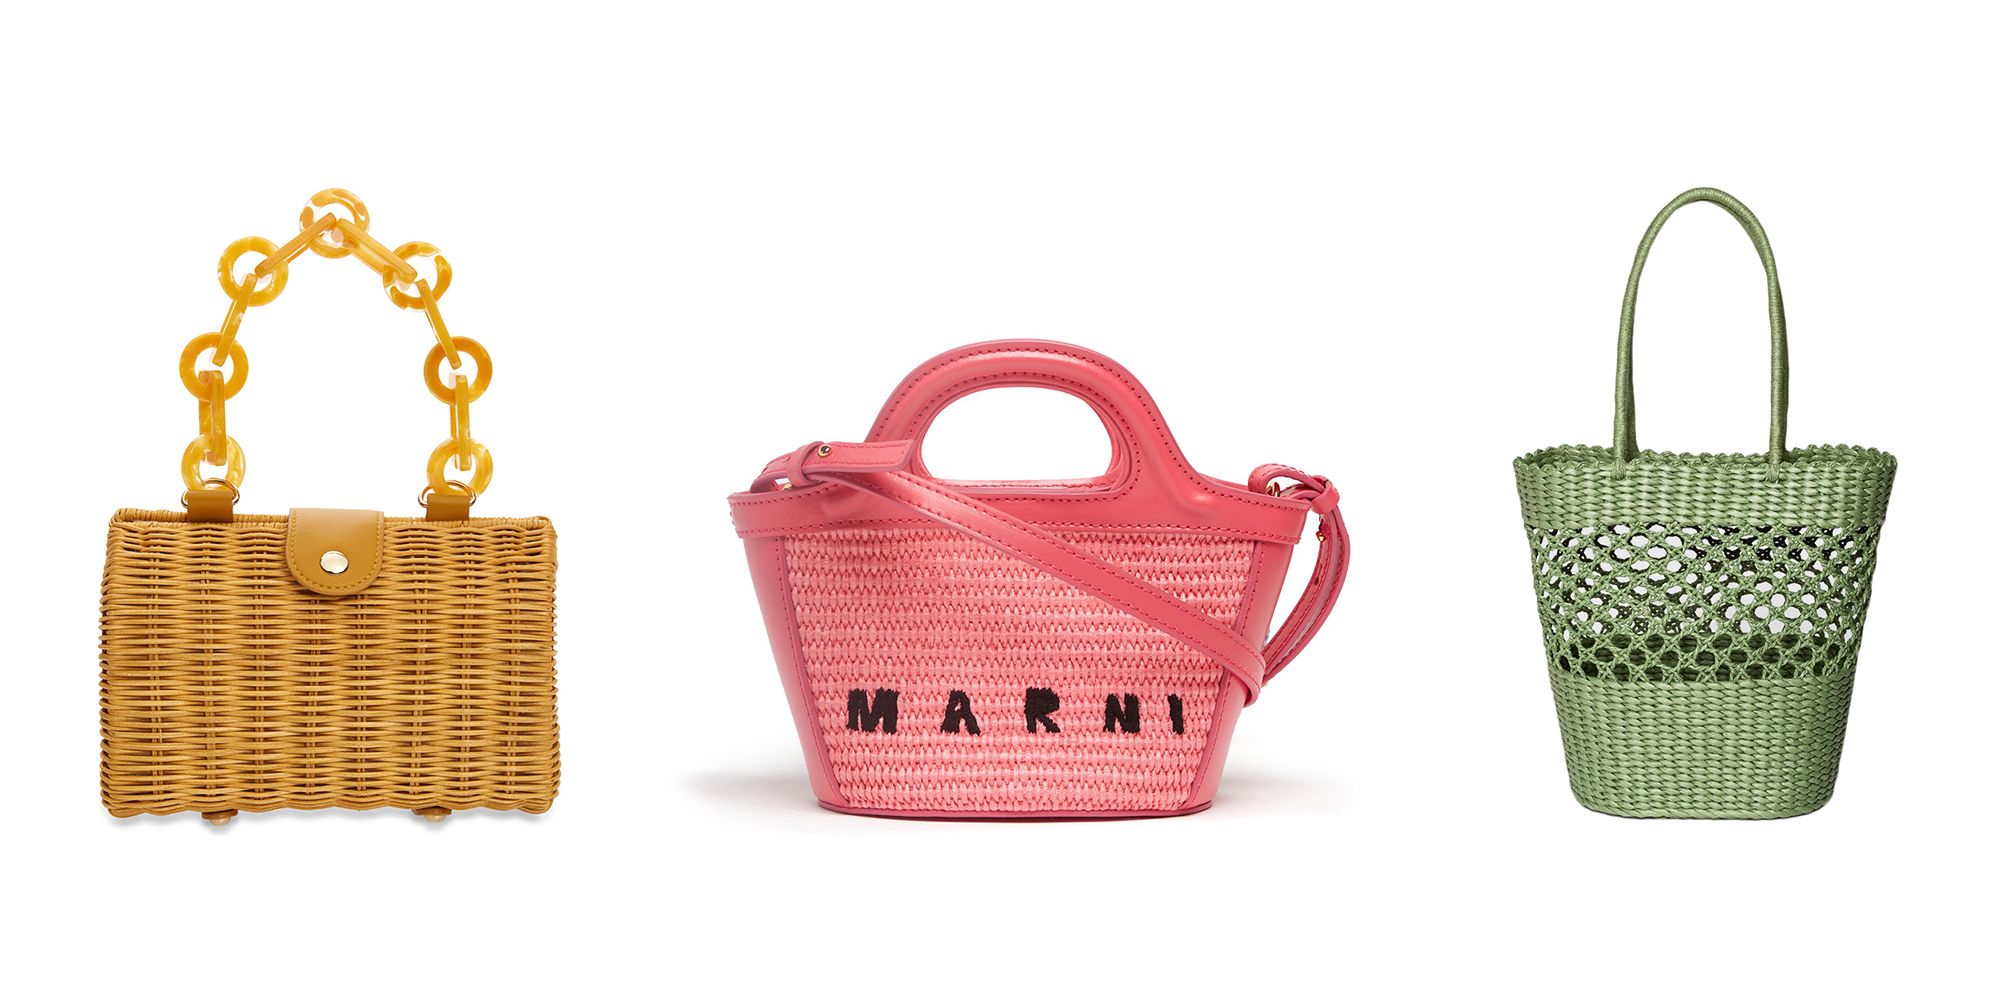 Your Summer Wardrobe Isn't Complete Without One of These Stylish Straw Bags